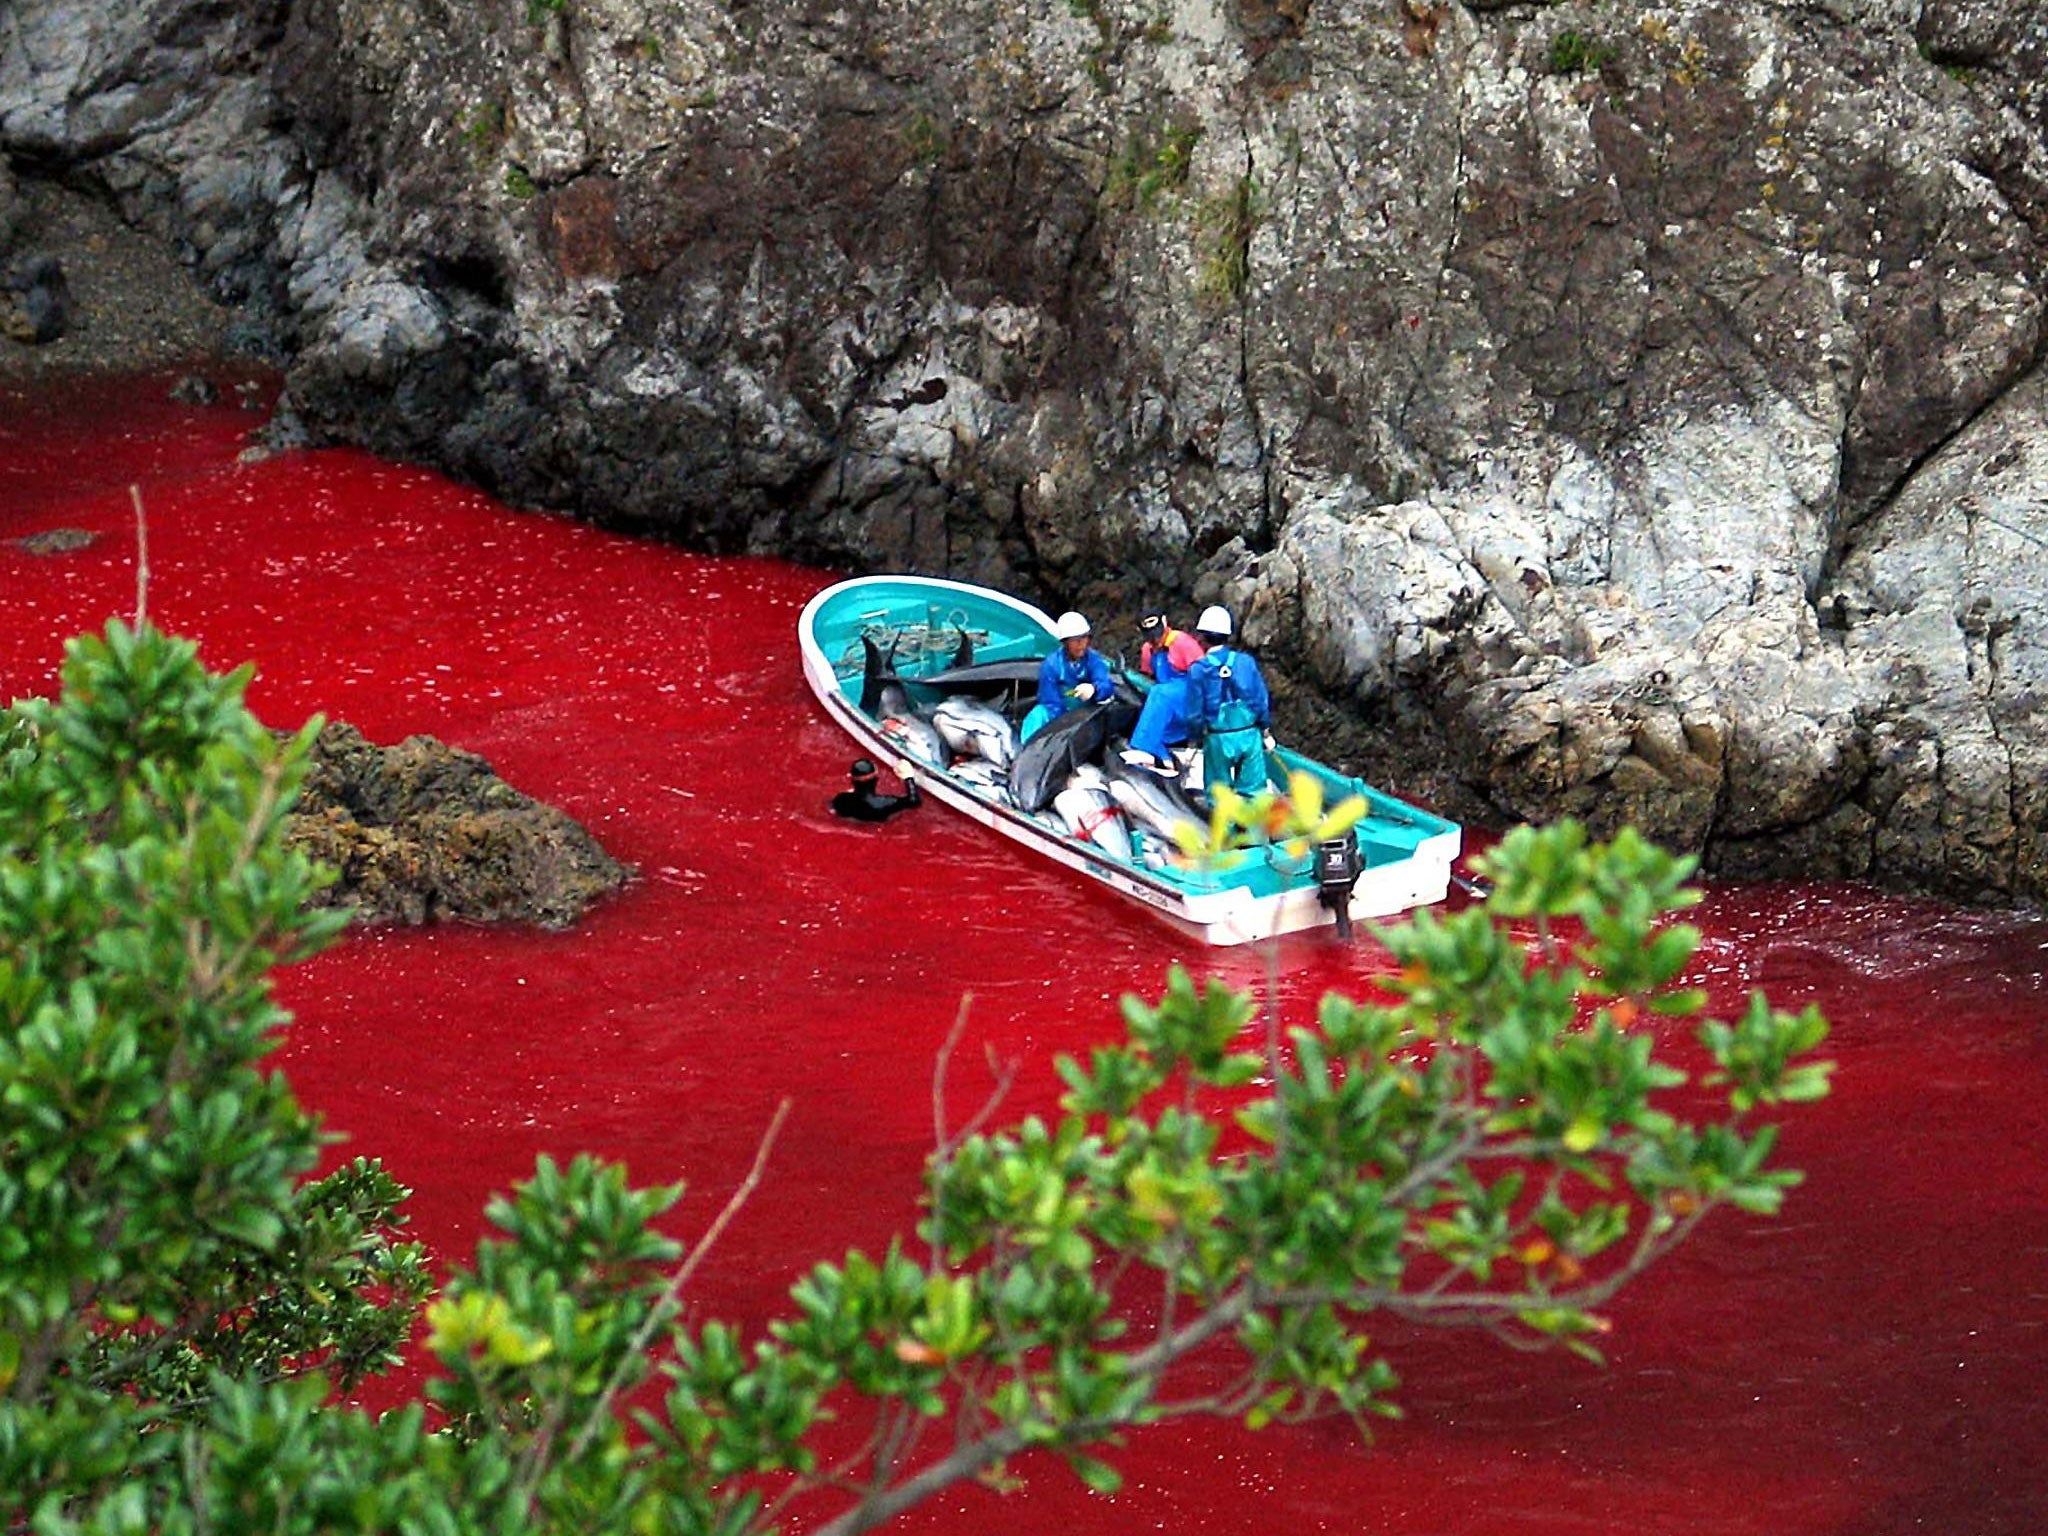 Japanese fishermen transporting slaughtered dolphins in Taiji harbour last year